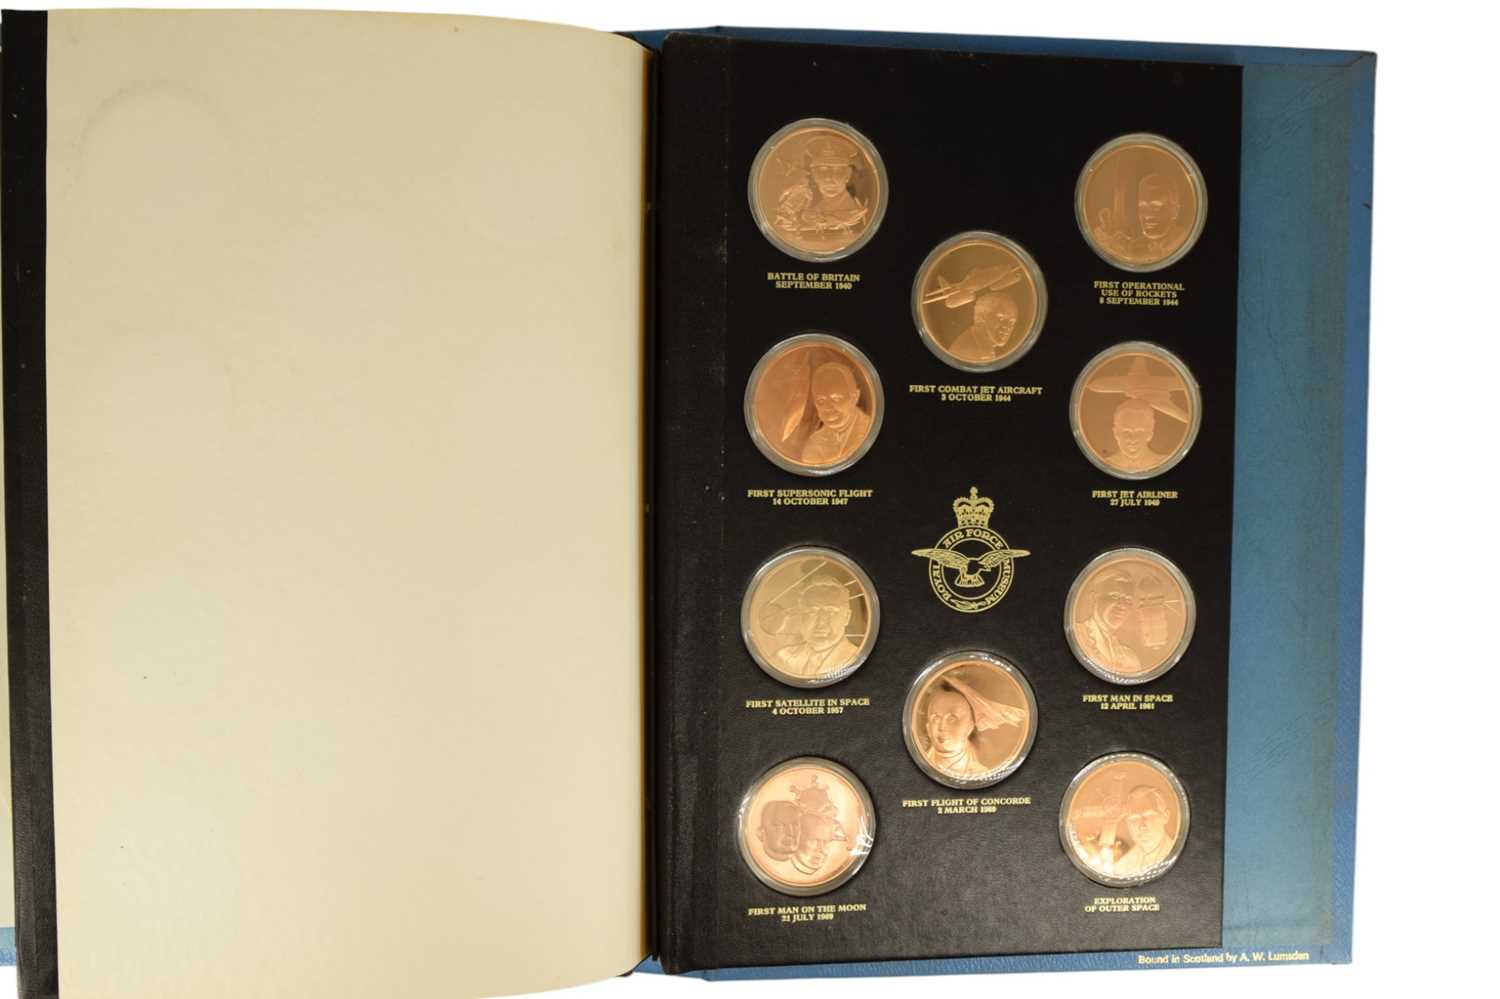 The History of Man in Flight bronze medal album for The Royal Airforce Museum by Franklin Mint Ltd - Image 14 of 15